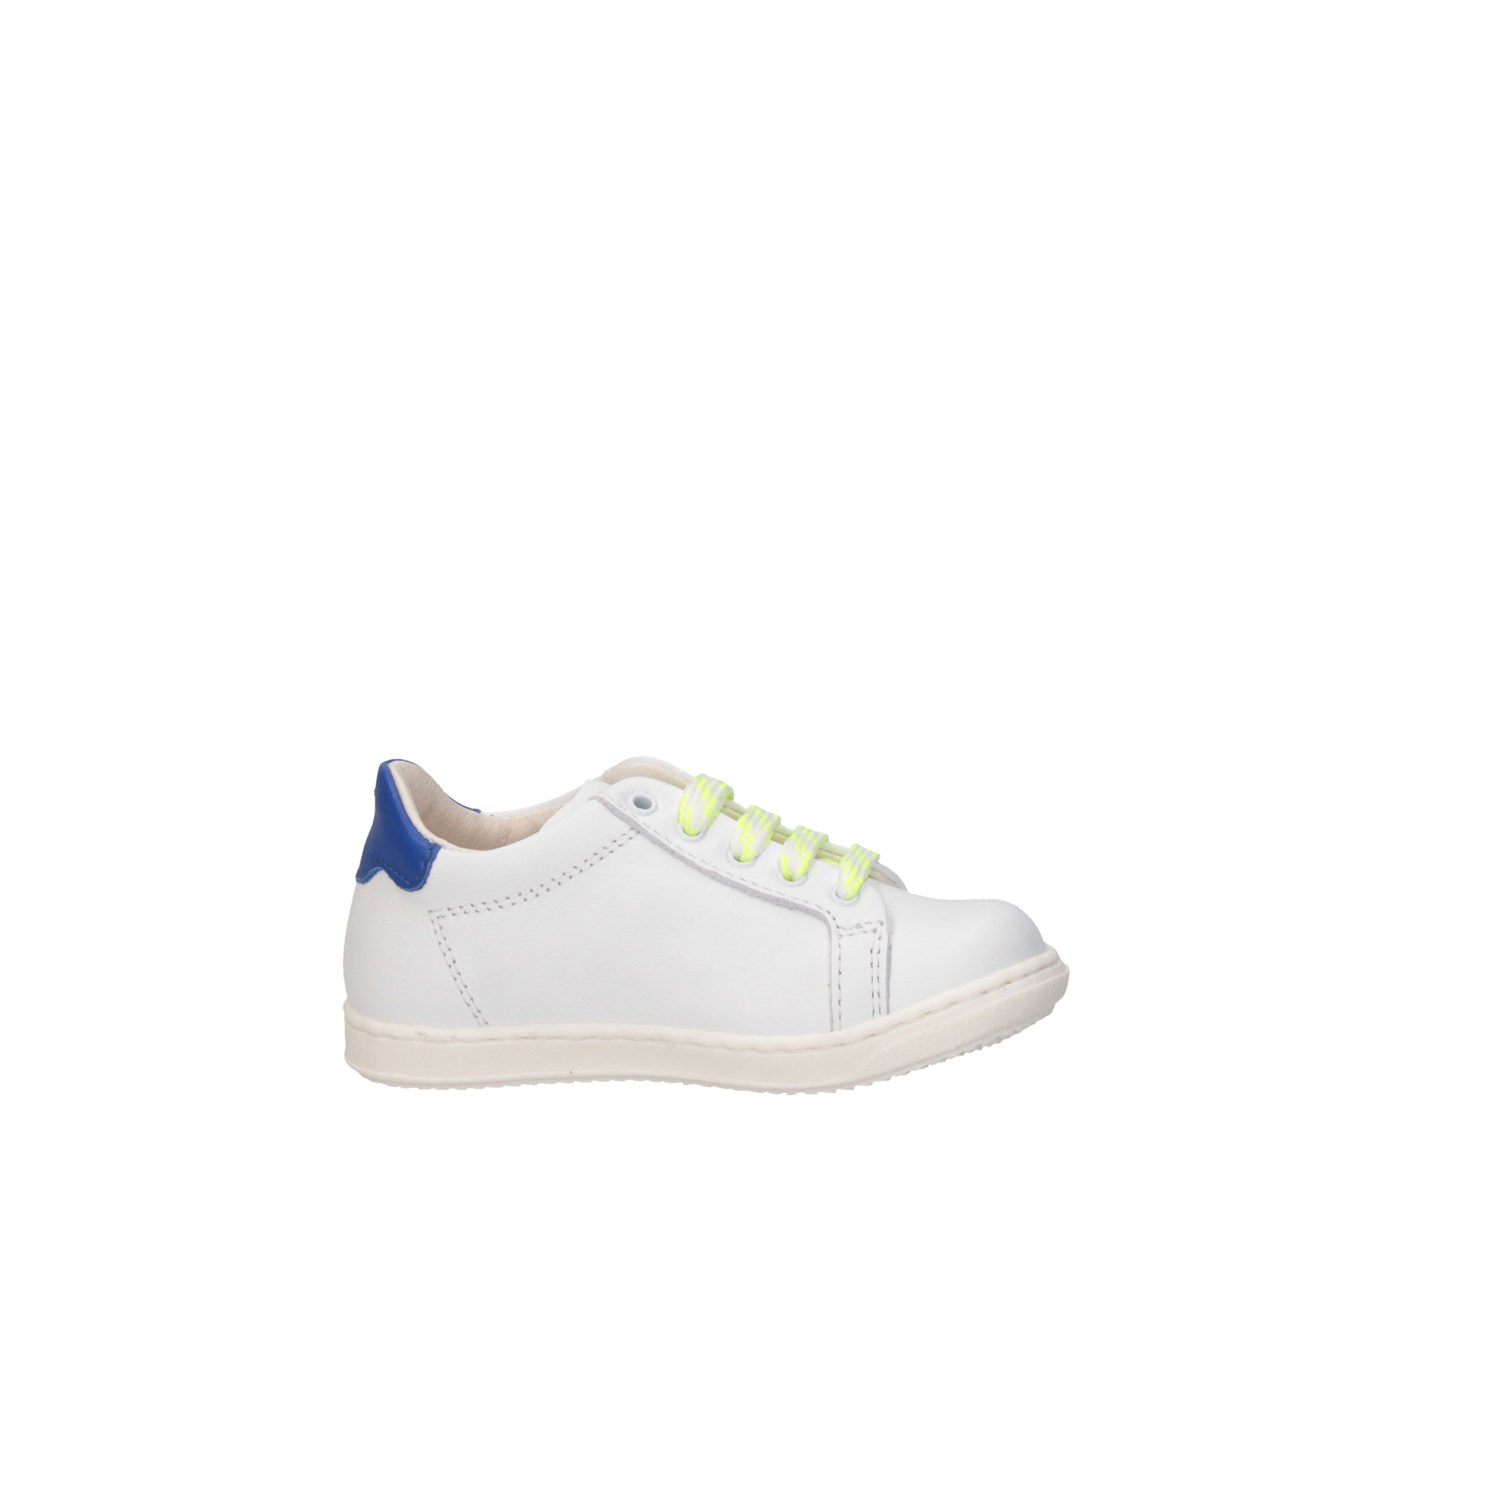 Gioiecologiche 6580 WHITE / FLUO YELLOW Shoes Child 